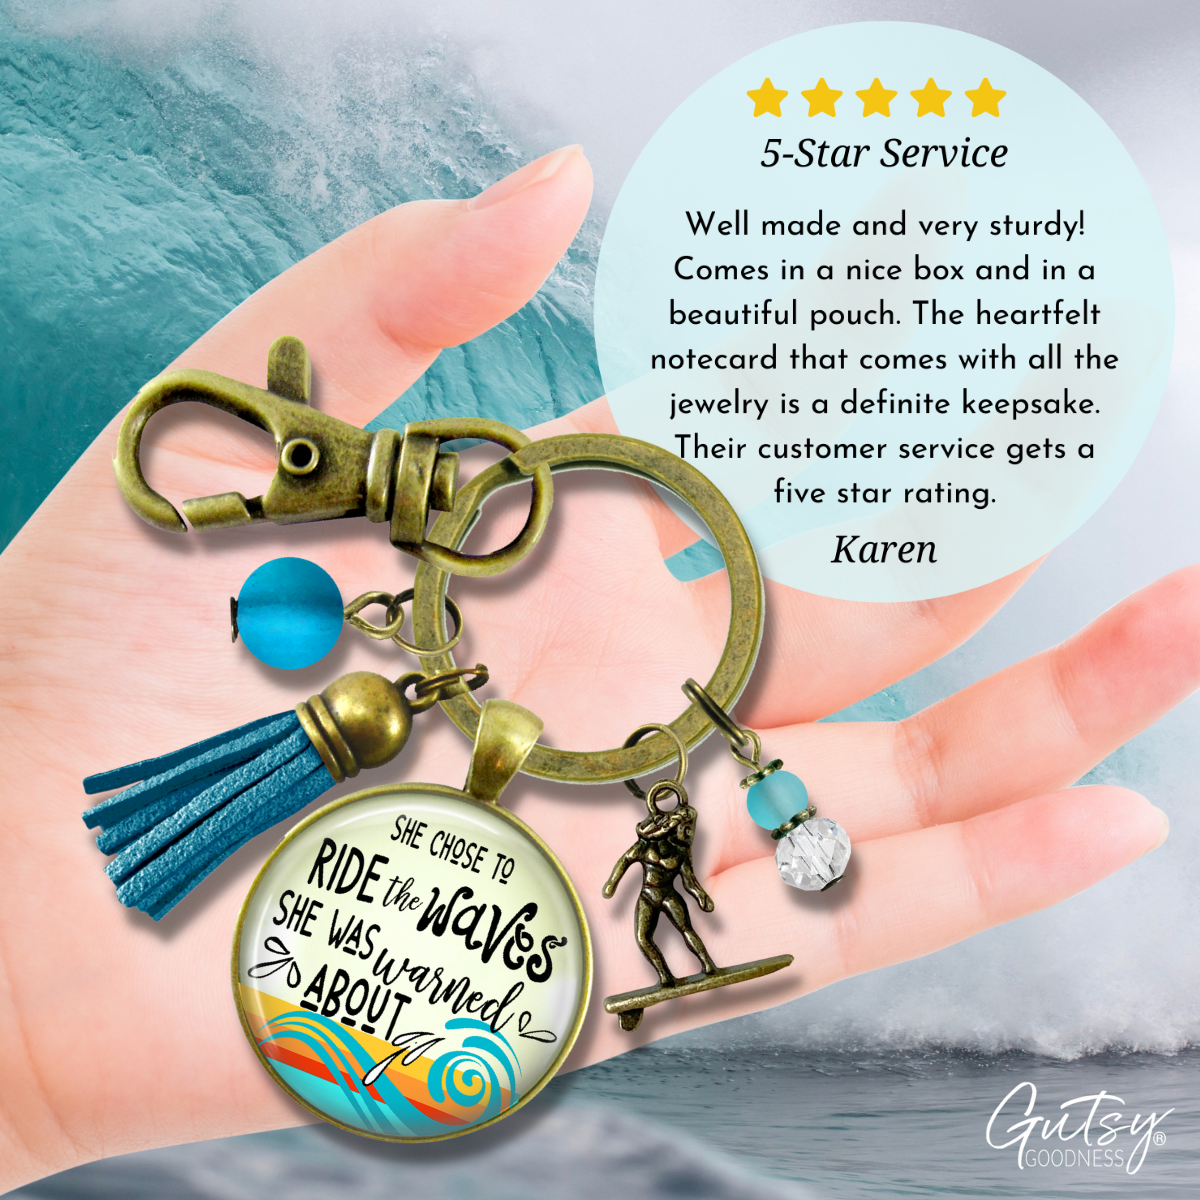 Surfer Girl Keychain She Rides The Waves They Warn Her About Motivation Life Mantra Tassel Charm  Keychain - Women - Gutsy Goodness Handmade Jewelry